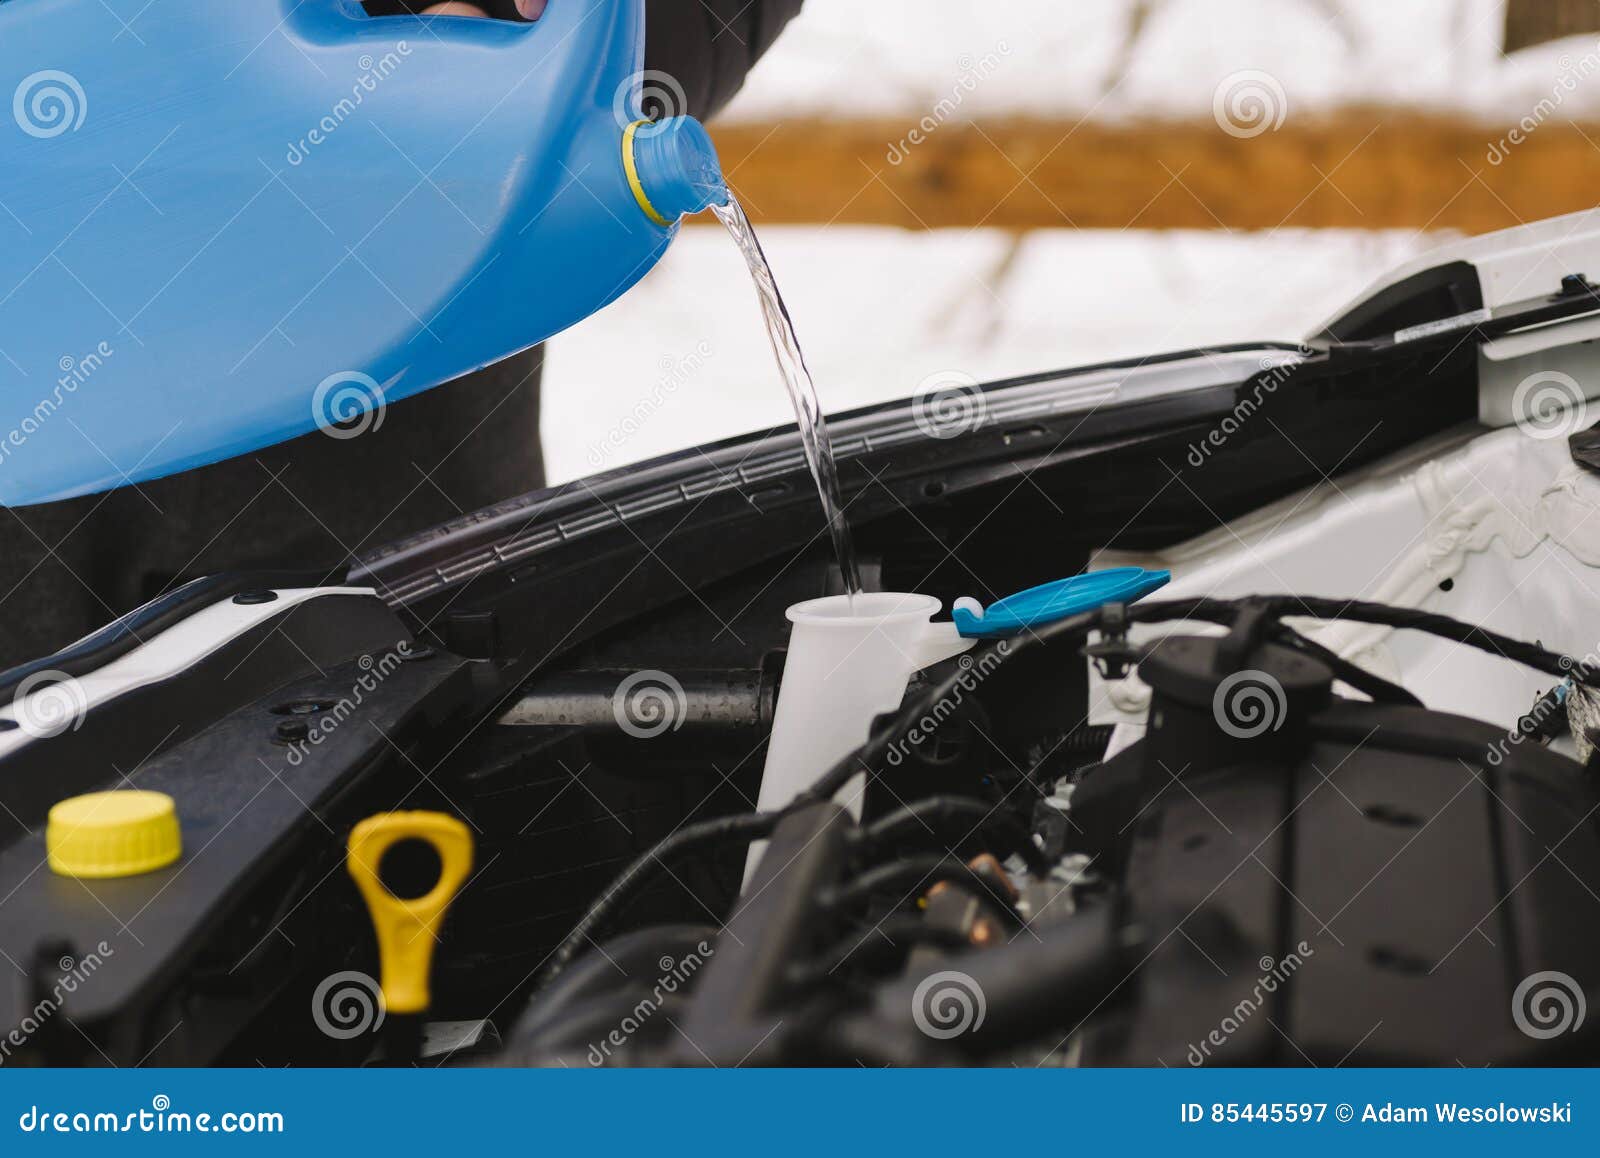 Man Pouring Liquid from Plastic Canister into Car Washer Fluid Reservoir, C  Stock Image - Image of canister, motor: 154937505